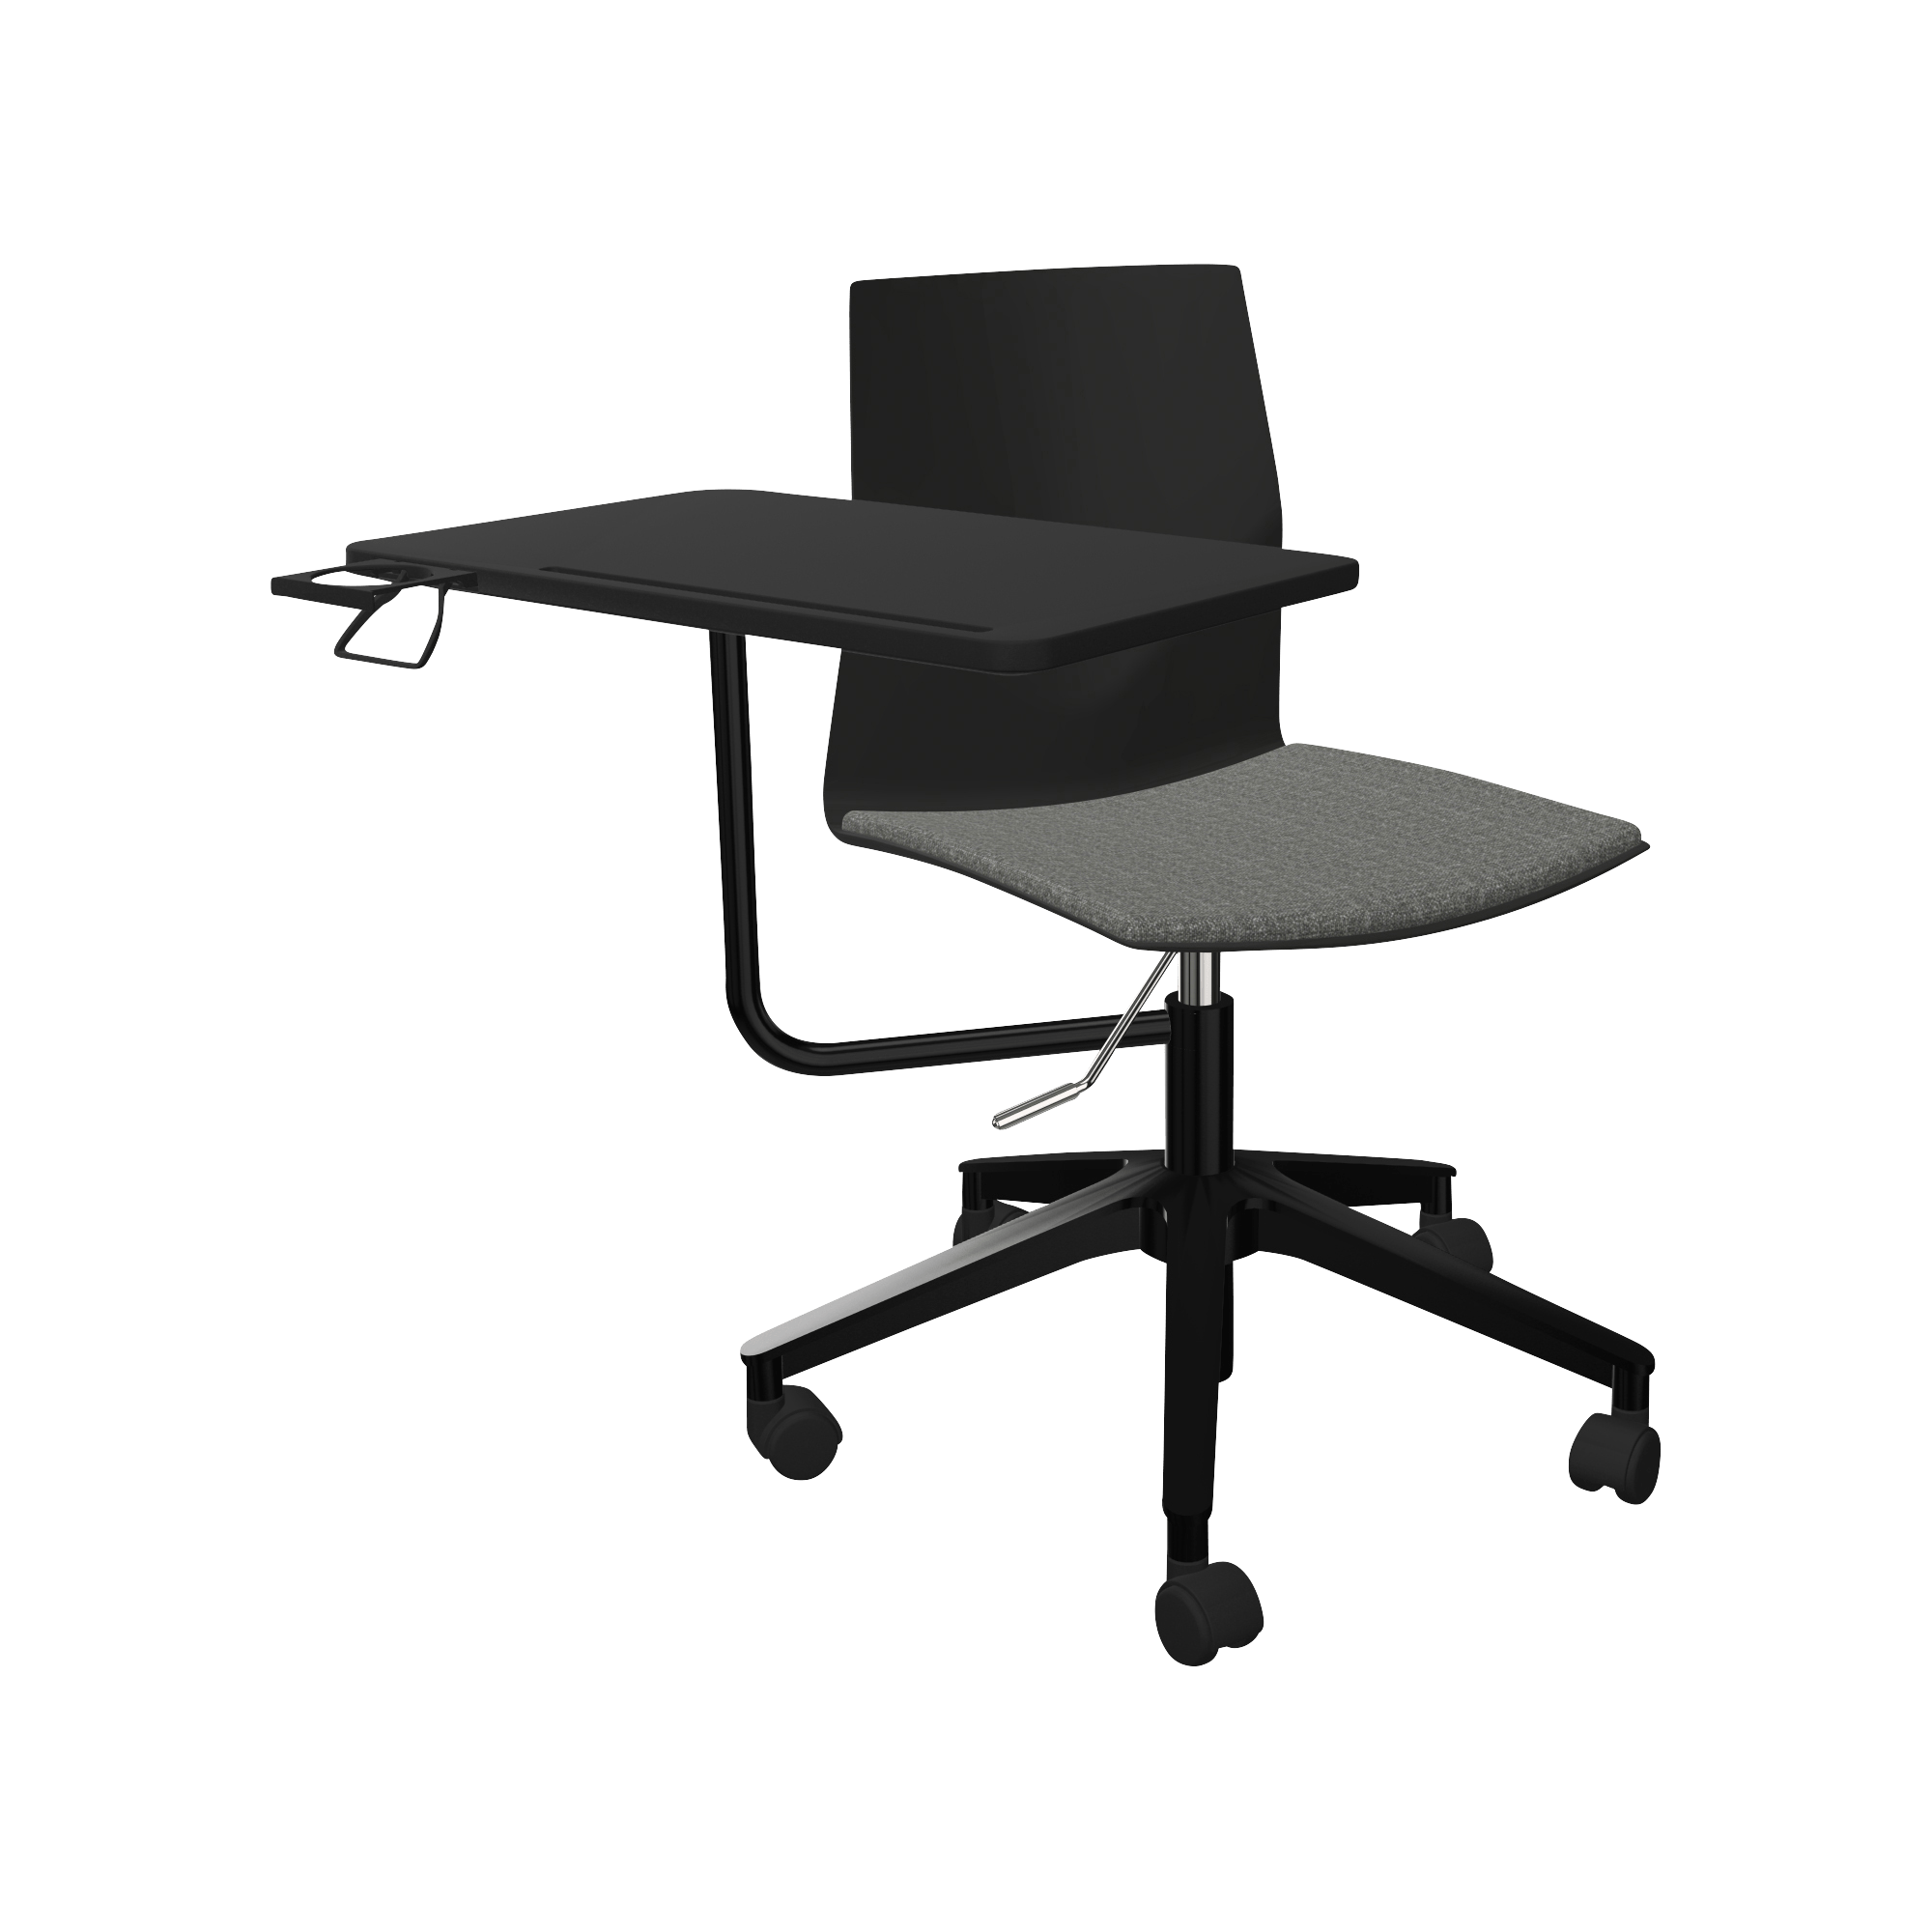 A black and gray office chair with a table.